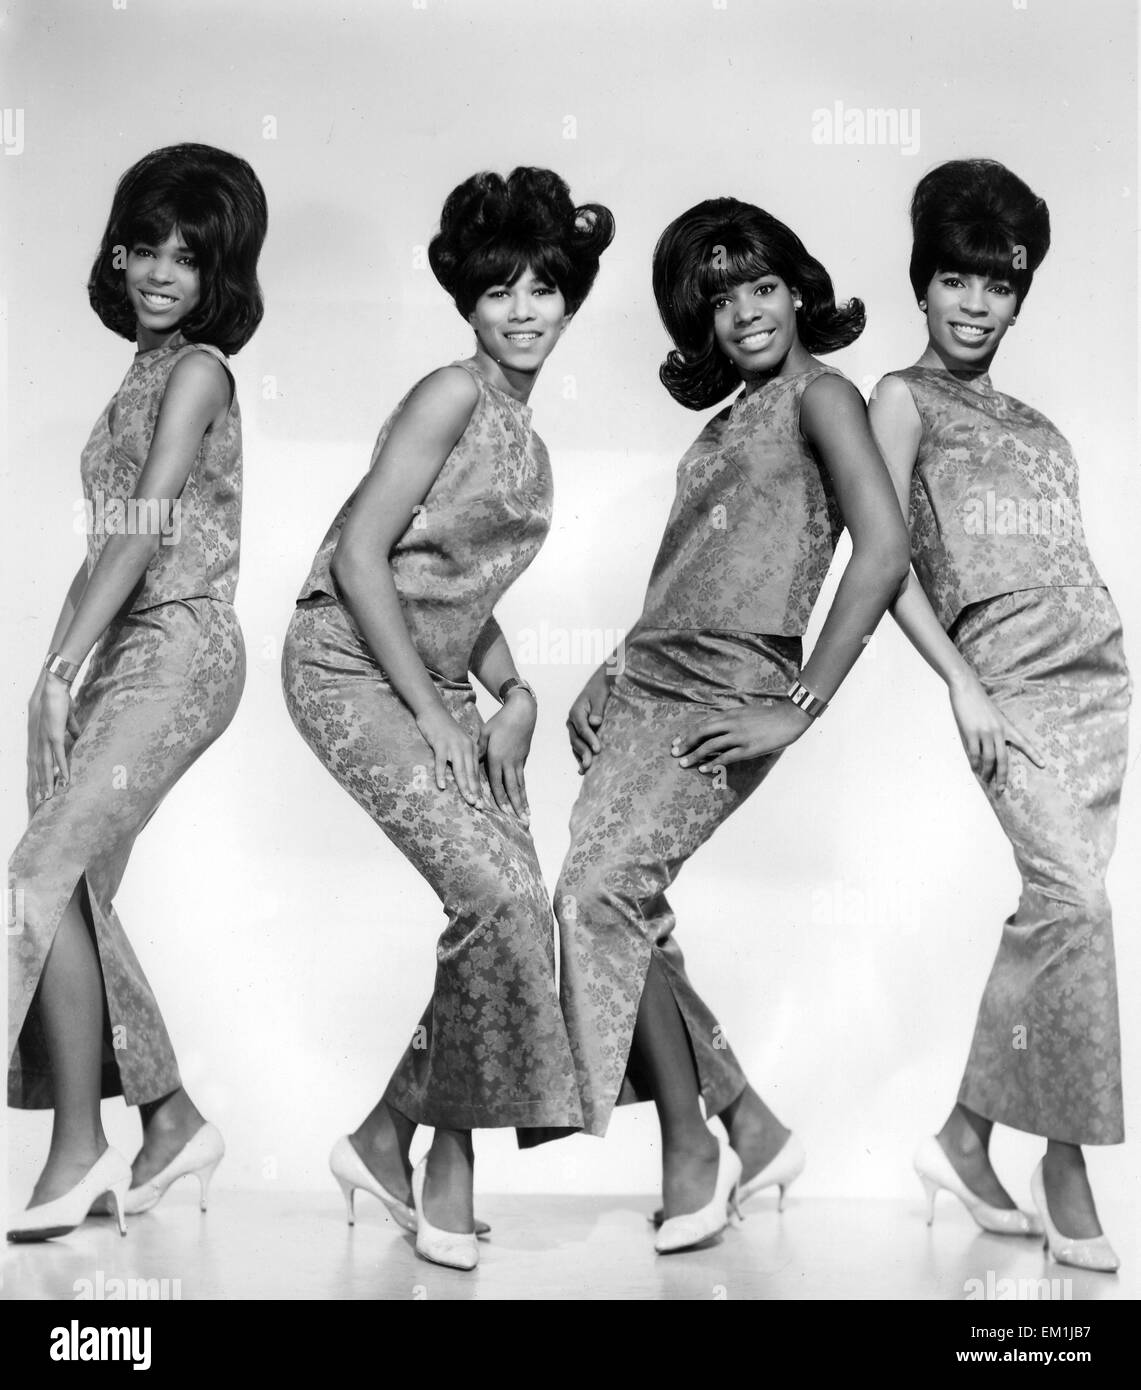 THE ROYALETTES Promotional photo of US vocal group about 1965 Stock Photo